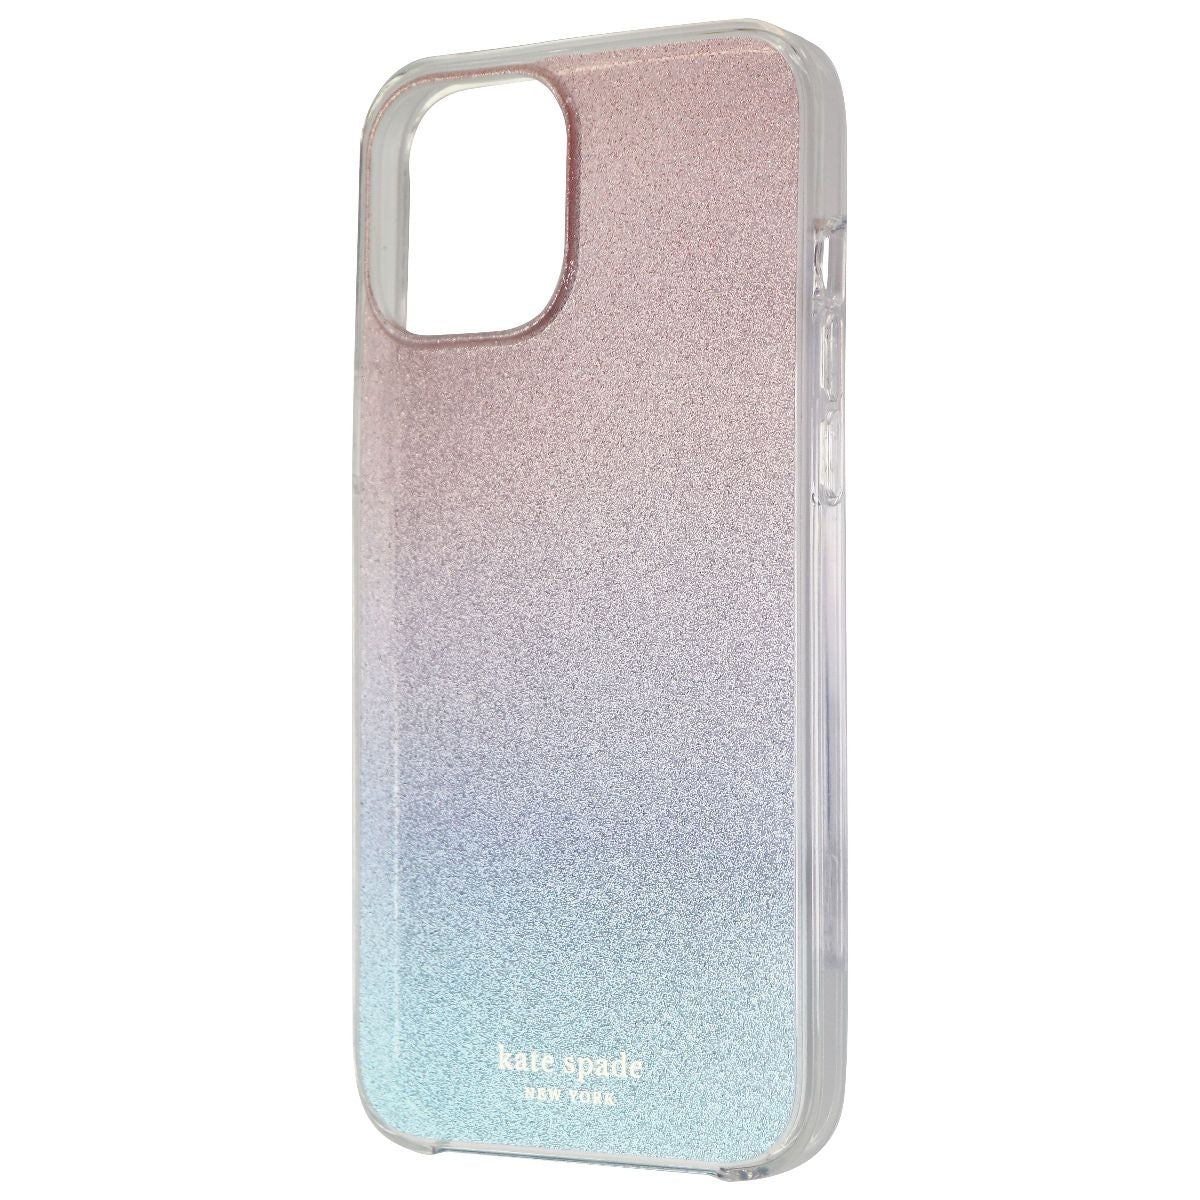 Kate Spade Protective Hardshell Case for iPhone 12 Pro Max - Glitter Ombre Pink Cell Phone - Cases, Covers & Skins Kate Spade New York    - Simple Cell Bulk Wholesale Pricing - USA Seller